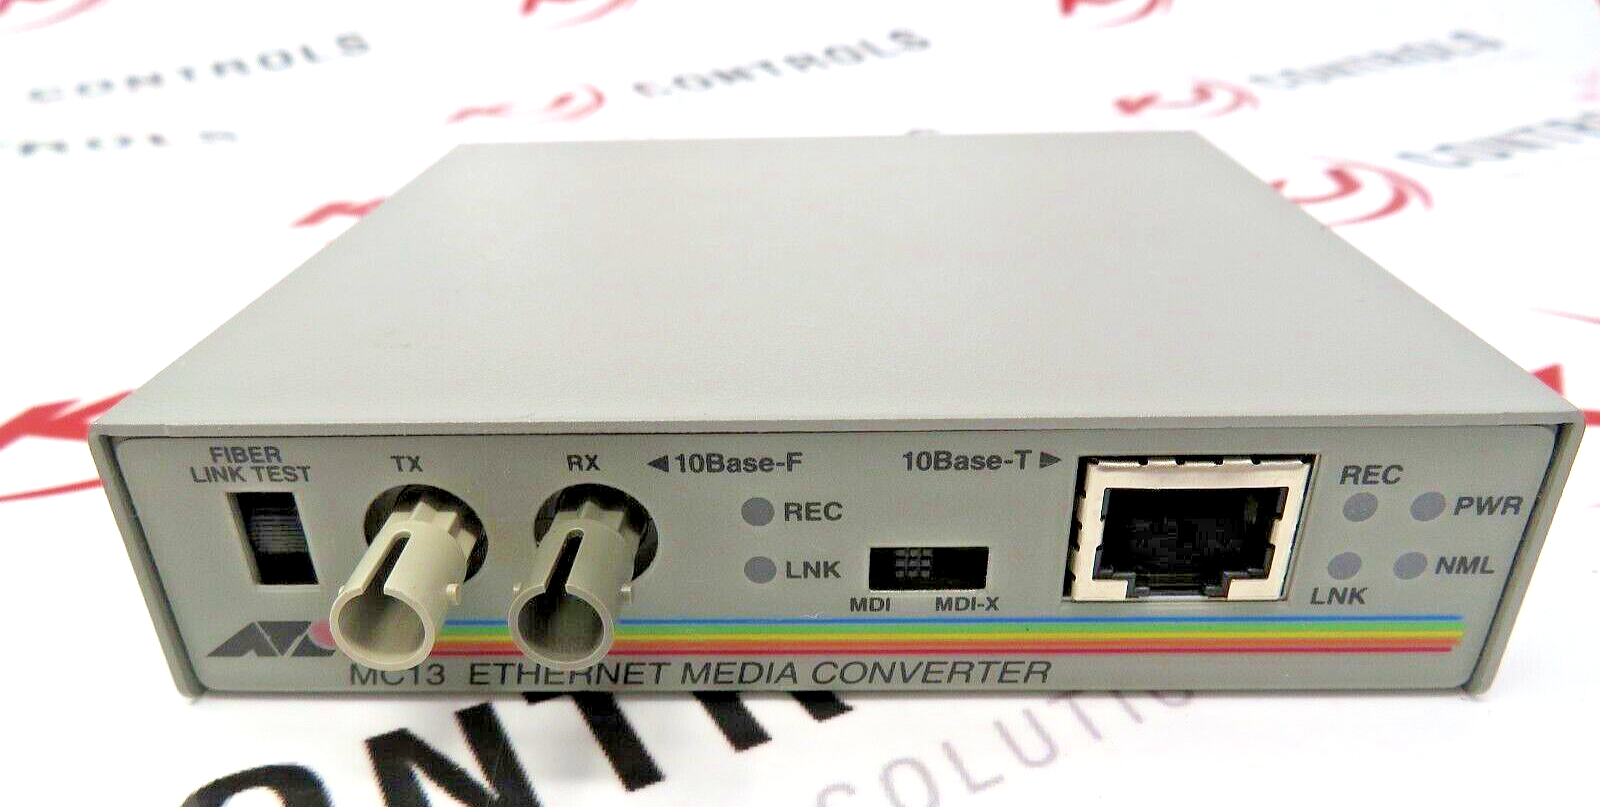 Allied Telesis AT-MC13 Ethernet Media Converter (12V Power Supply Not Included)